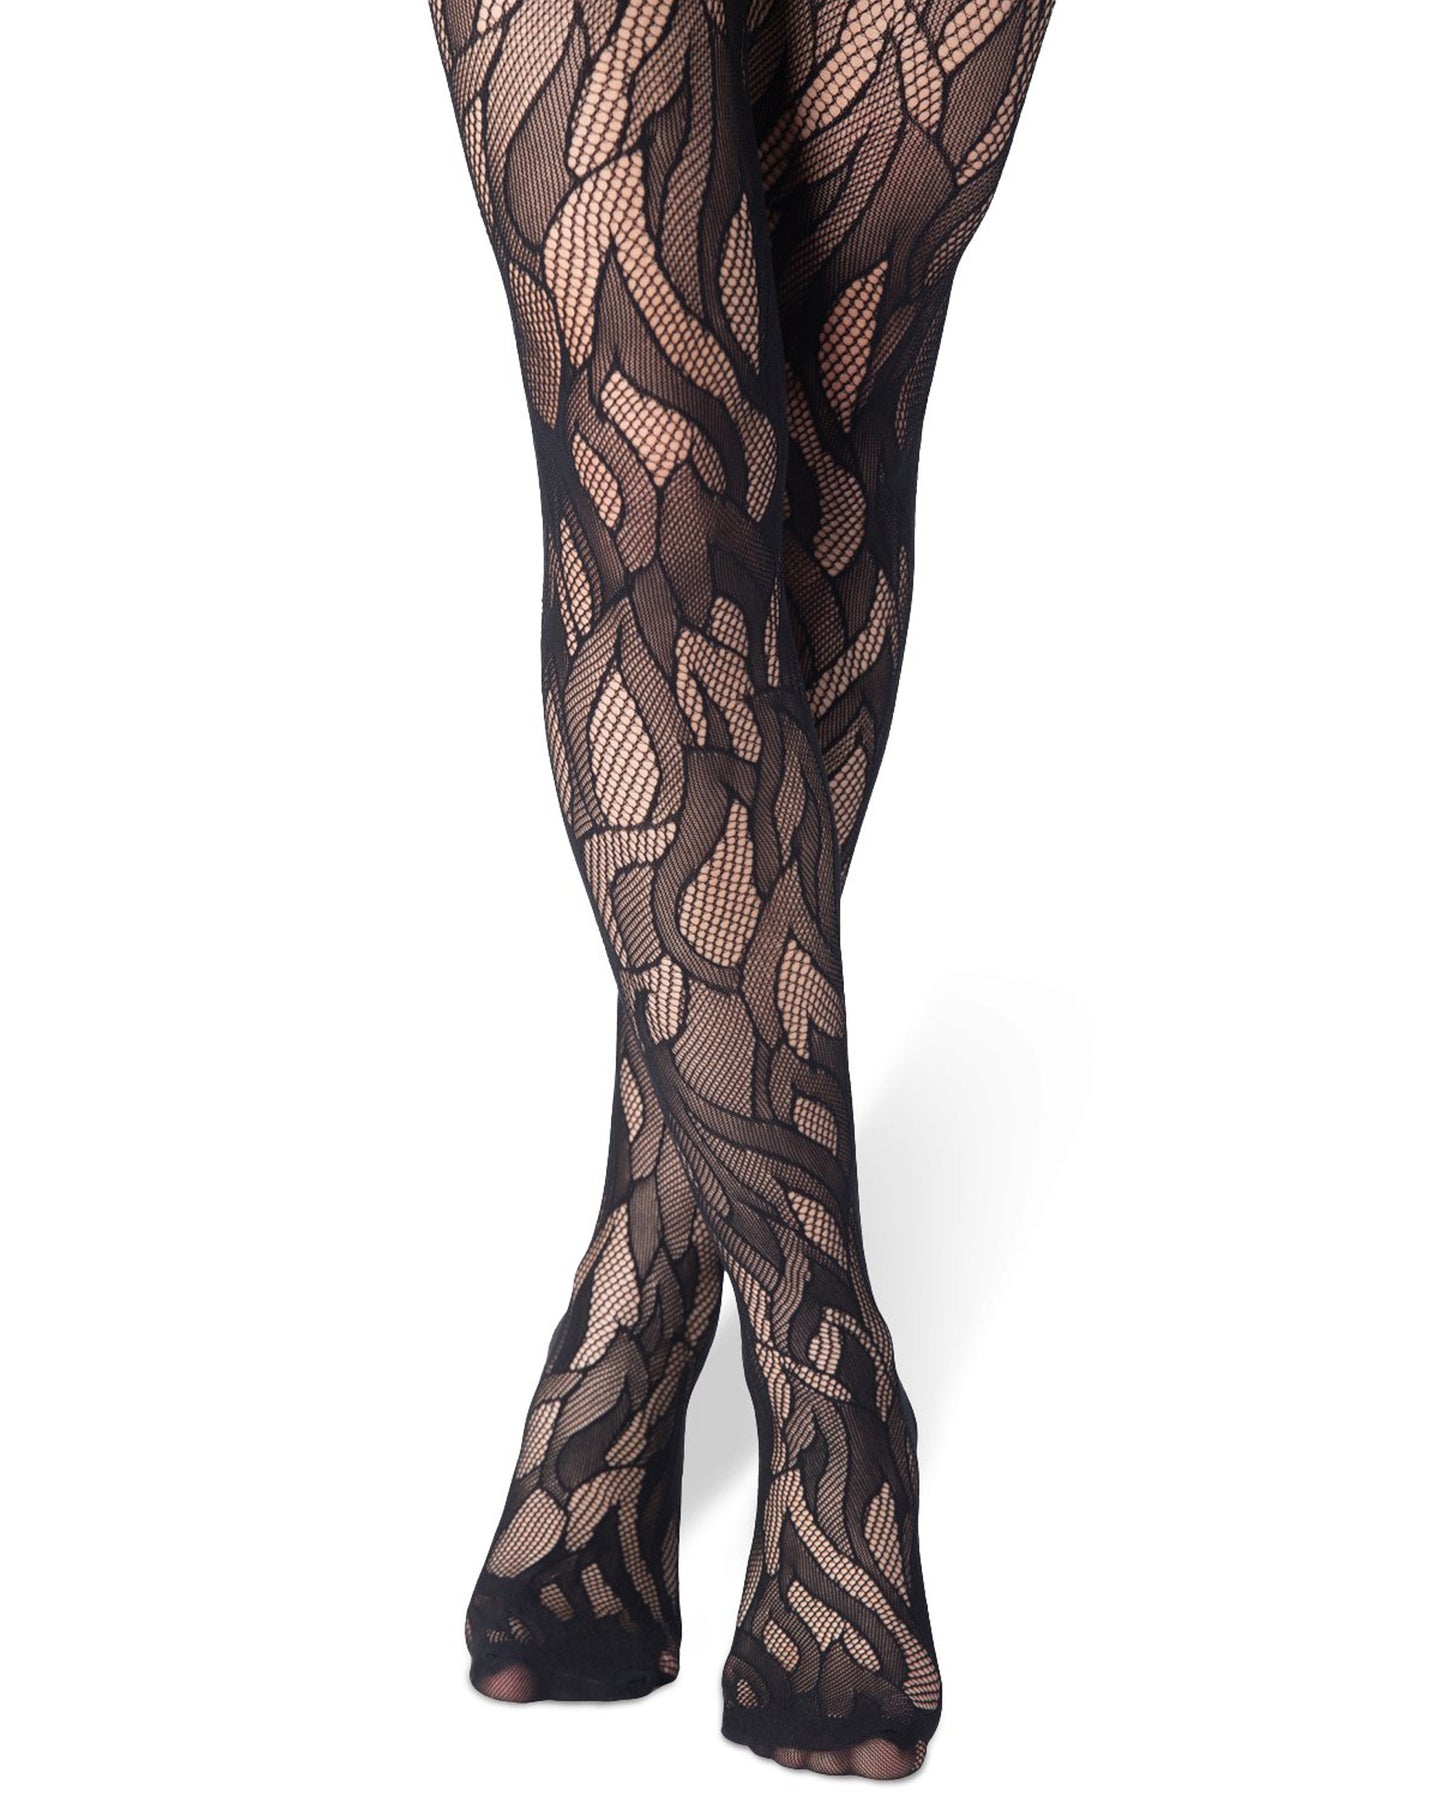 Emilio Cavallini Flames Tights - Black open fishnet tights with a stylised flame pattern and micro-mesh toe.